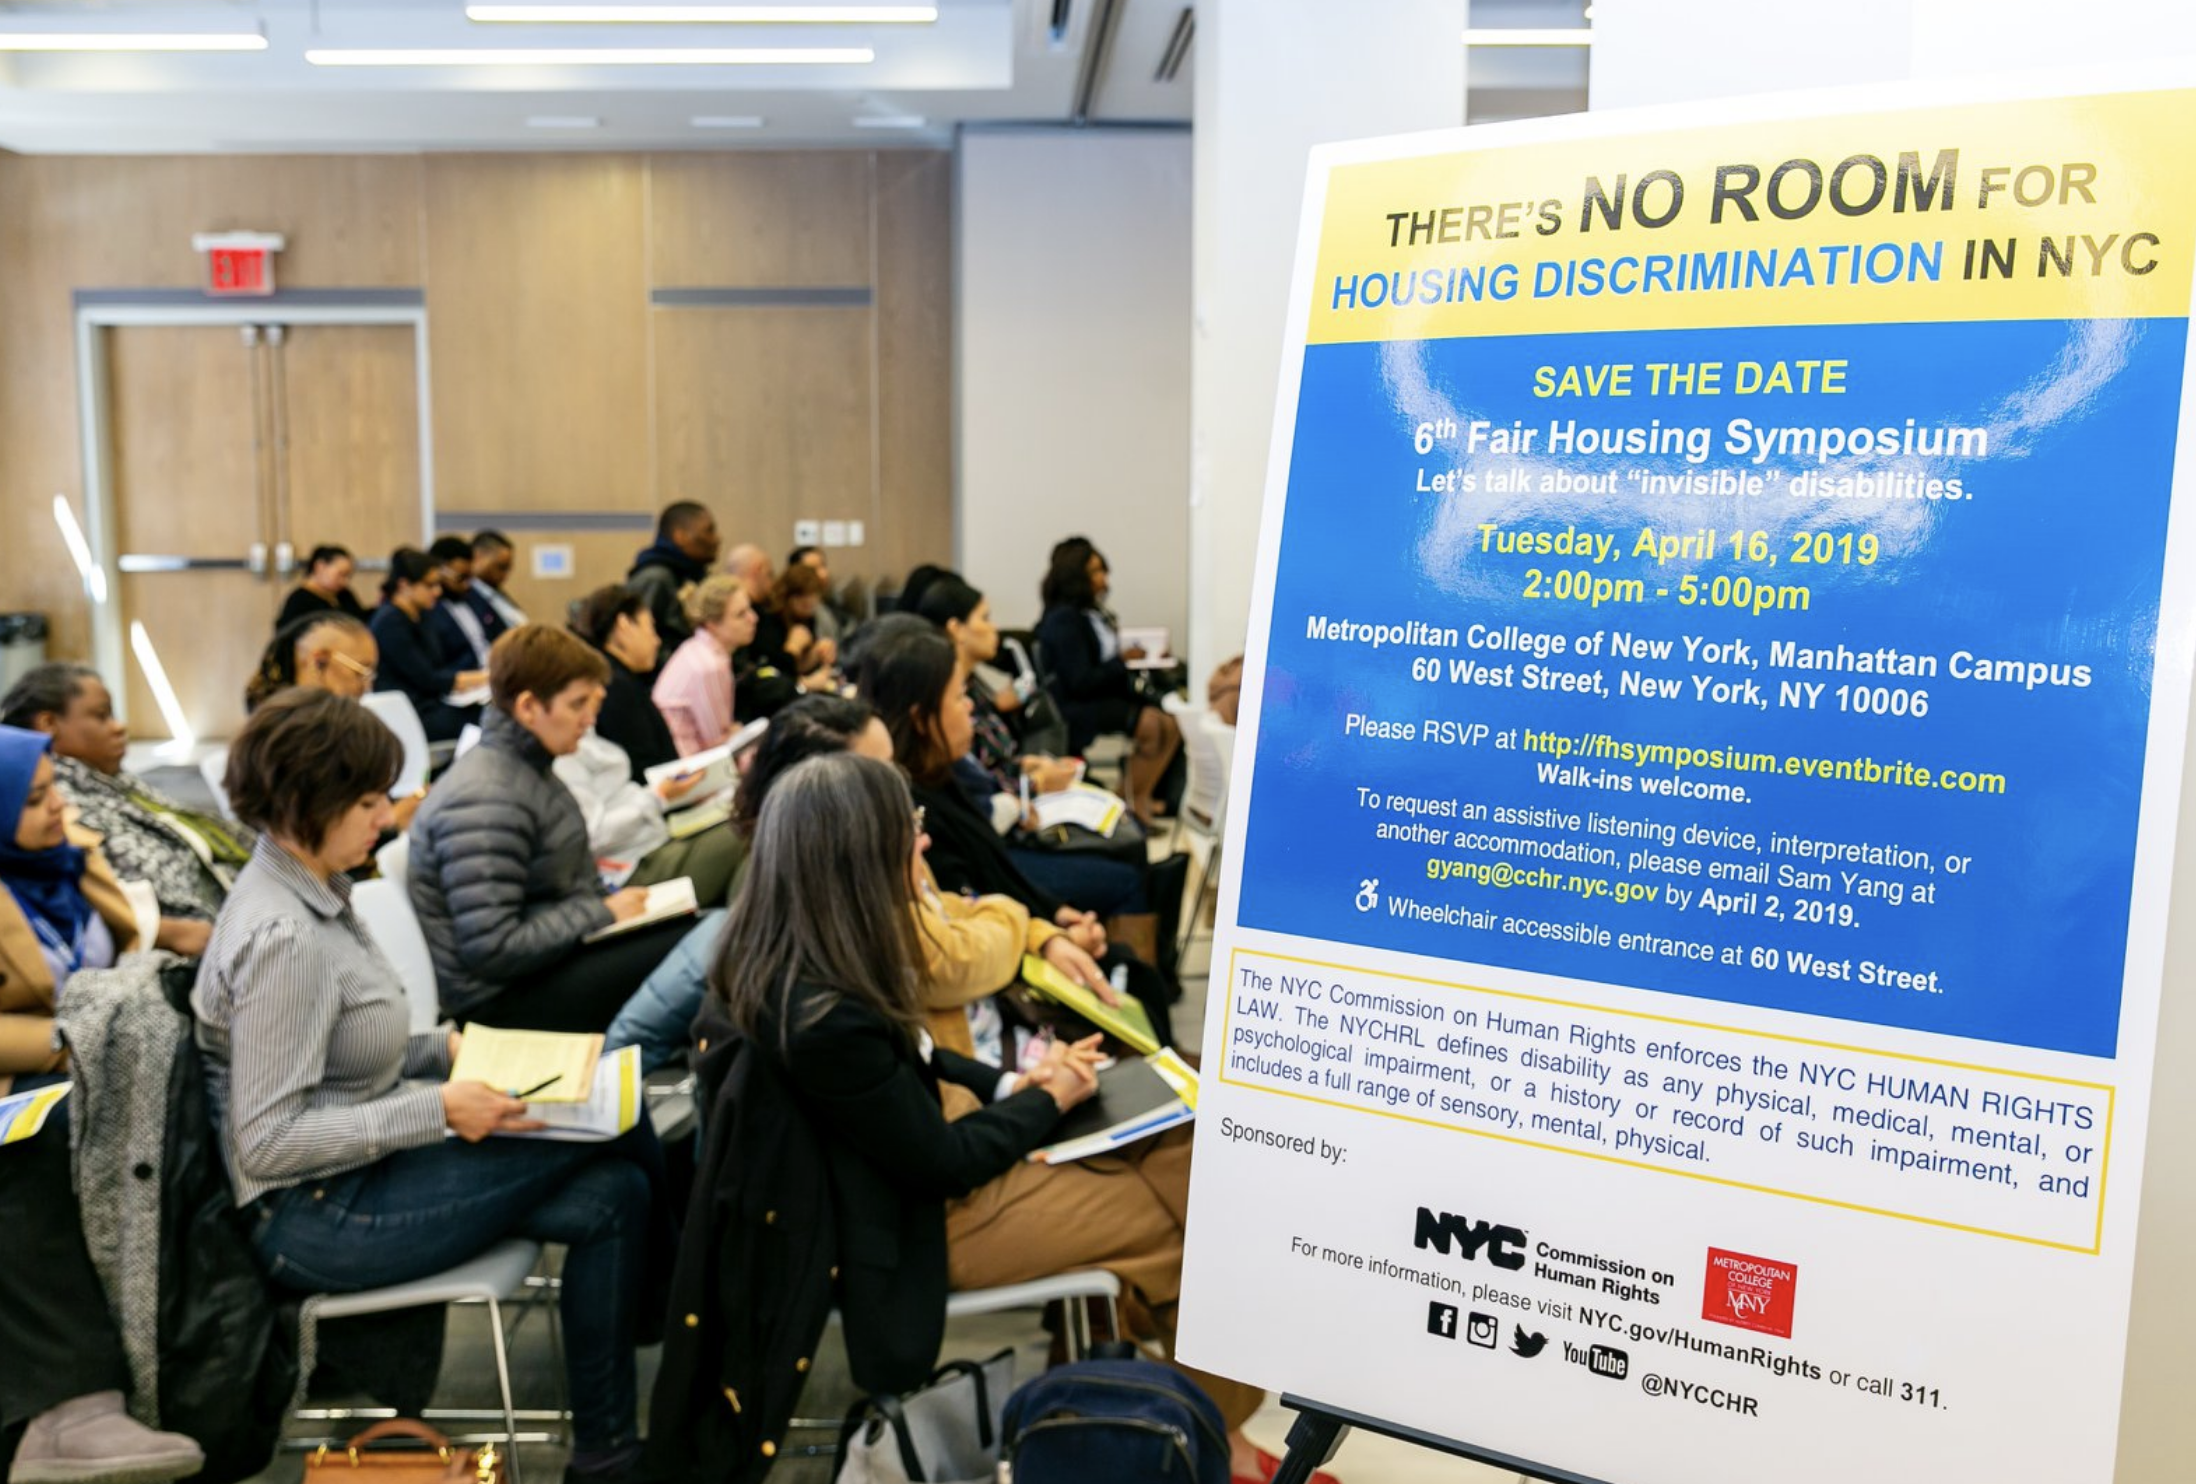 Profile of audience sitting at event next to a sign that reads: “There’s No Room For Housing Discrimination in NYC,” 6th Fair Housing Symposium, Tuesday, April 16, 2019.